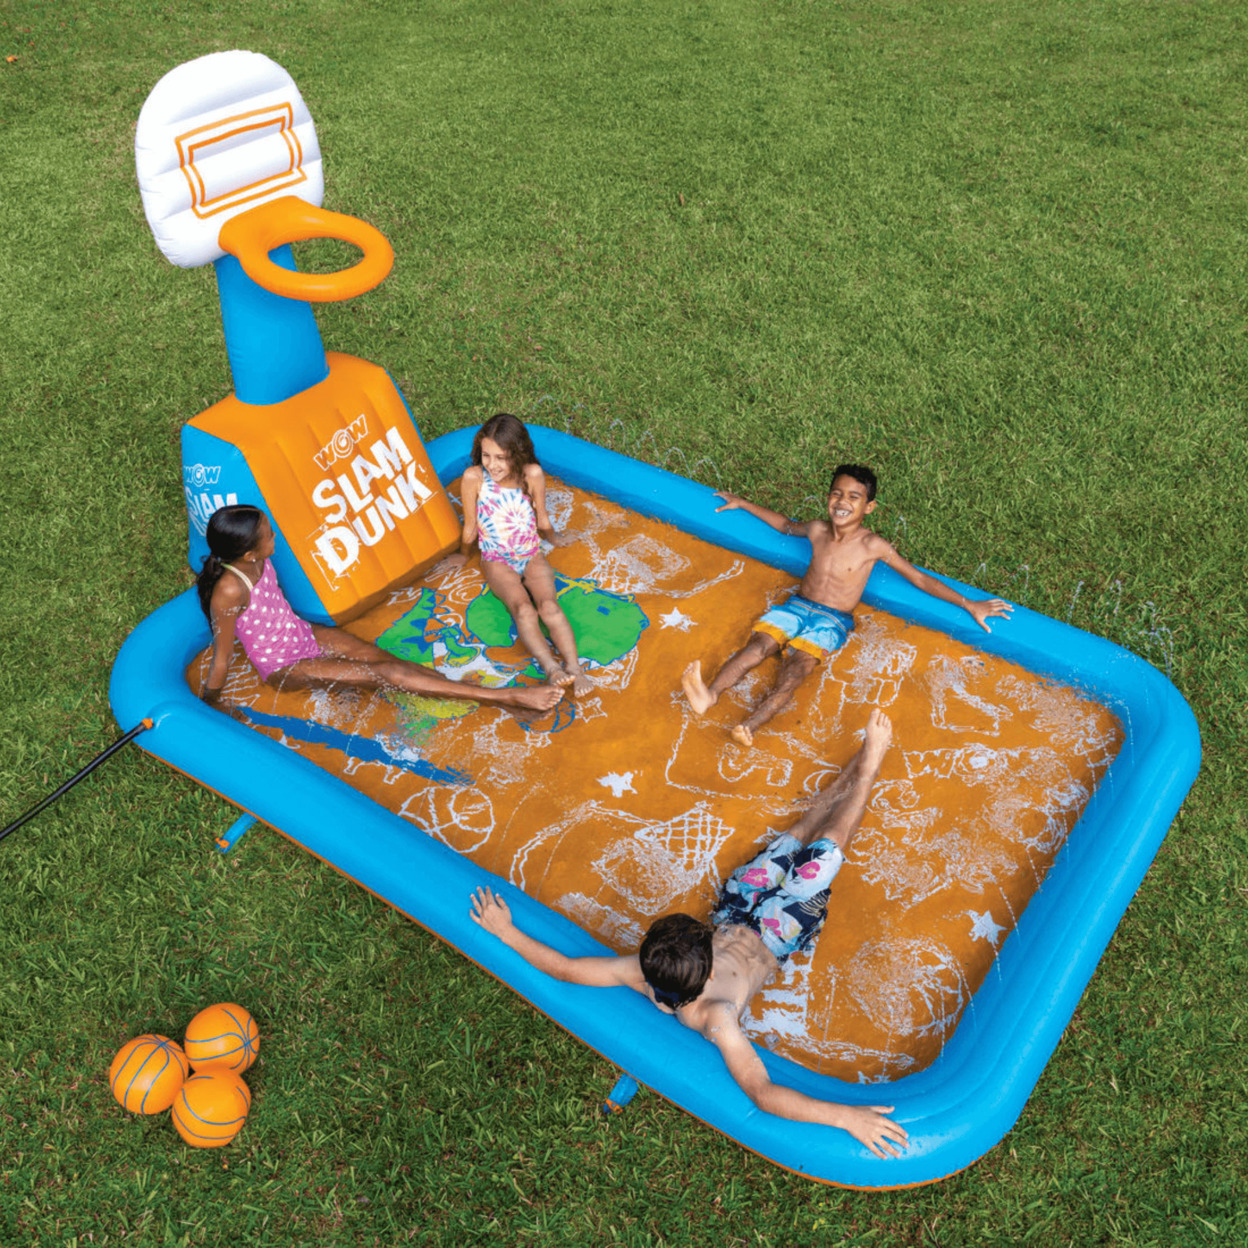 WOW Sports Slam Dunk Splash Pad (Pad Only/Hoop Not Included)